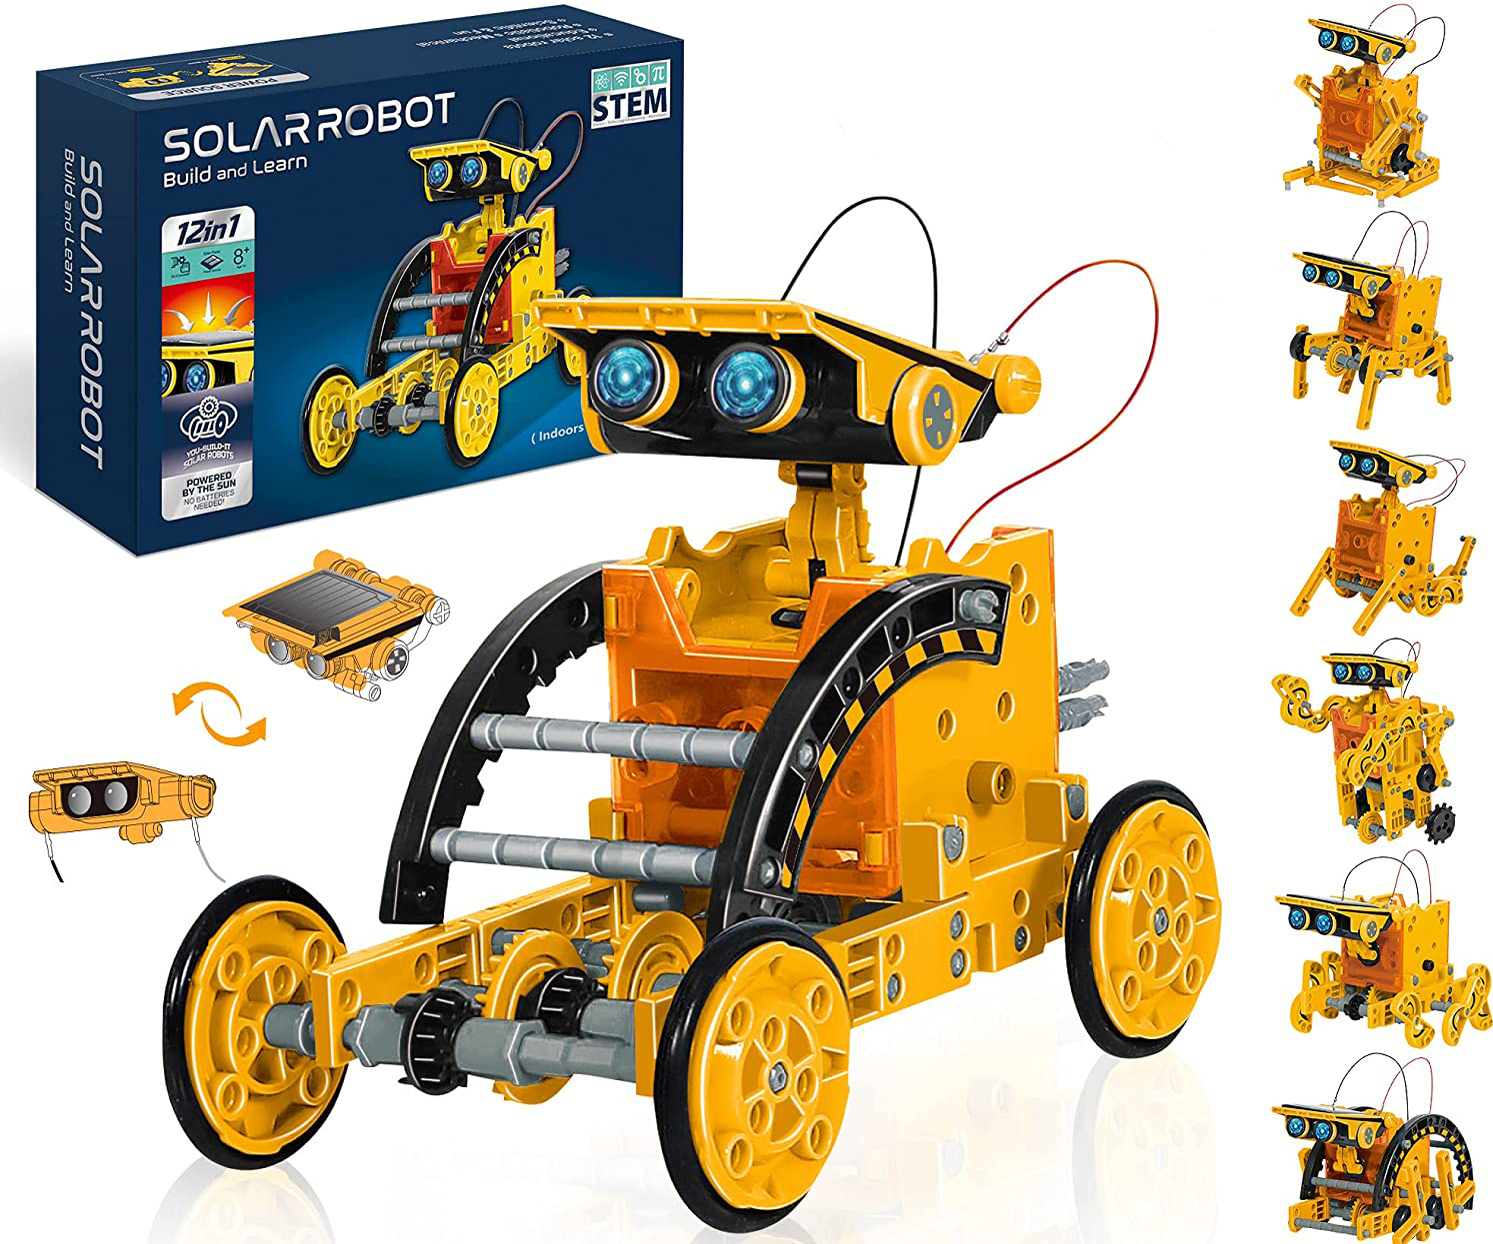 ATCRINICT STEM Toy 11-in-1 Solar Robot Kit for Kids Learning Science Building 